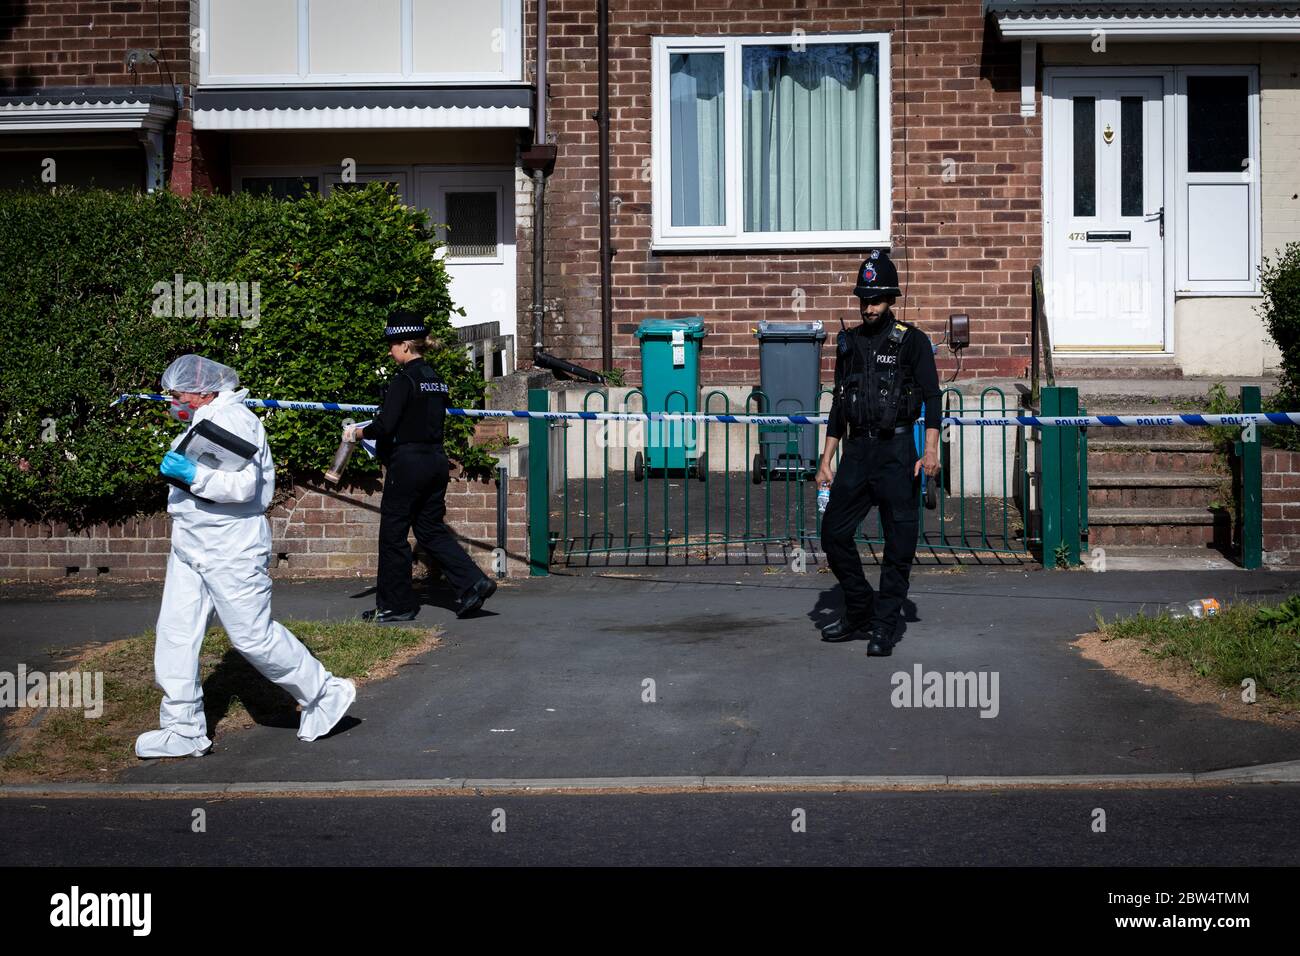 Manchester, UK. 29th May, 2020. A forensic officer leaves the crime scene  on Greenwood Road. Credit: Andy Barton/Alamy Live News Stock Photo - Alamy